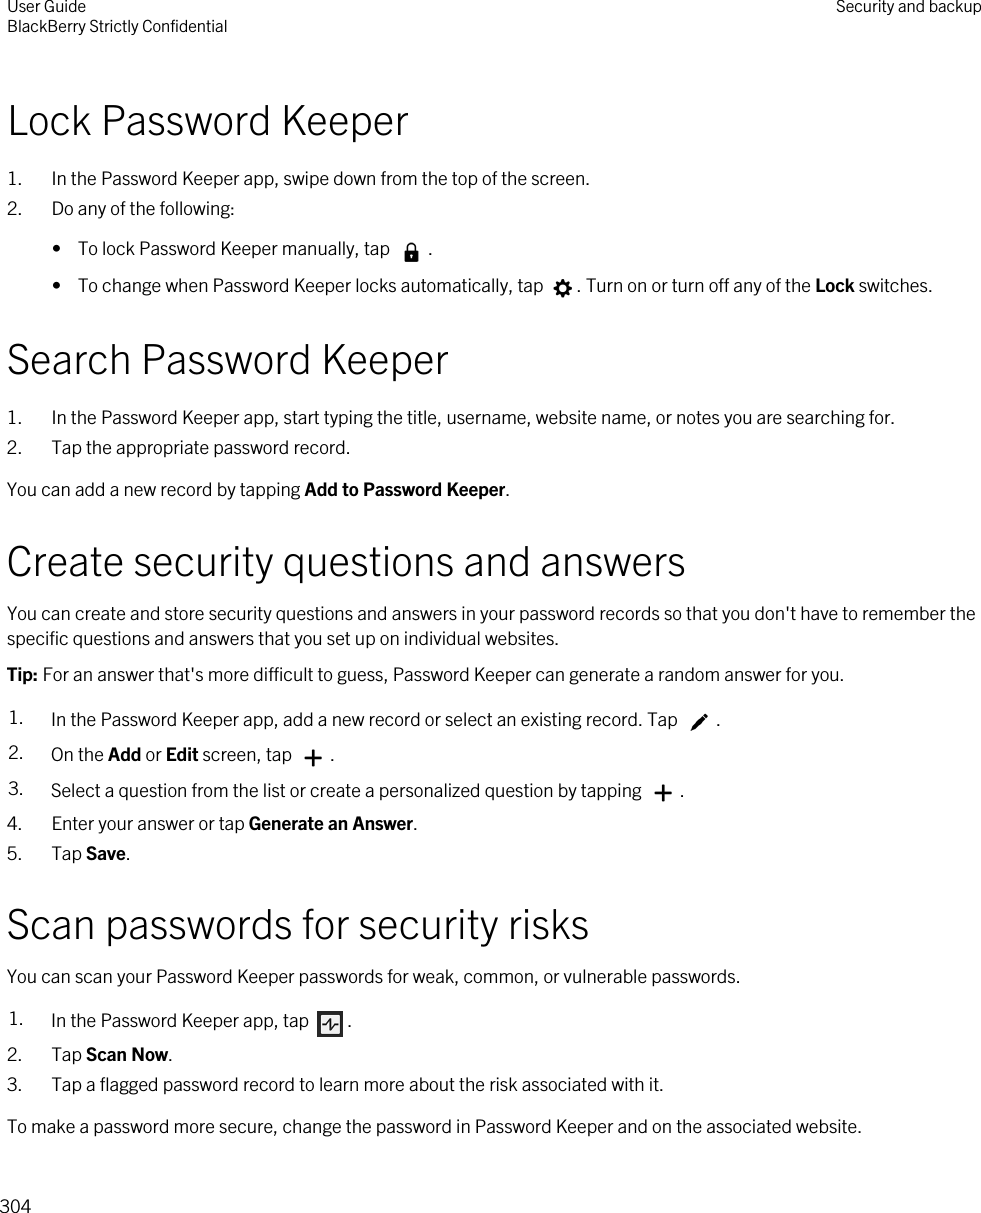 Lock Password Keeper1. In the Password Keeper app, swipe down from the top of the screen.2. Do any of the following:•  To lock Password Keeper manually, tap  .•  To change when Password Keeper locks automatically, tap  . Turn on or turn off any of the Lock switches.Search Password Keeper1. In the Password Keeper app, start typing the title, username, website name, or notes you are searching for.2. Tap the appropriate password record.You can add a new record by tapping Add to Password Keeper.Create security questions and answersYou can create and store security questions and answers in your password records so that you don&apos;t have to remember the specific questions and answers that you set up on individual websites.Tip: For an answer that&apos;s more difficult to guess, Password Keeper can generate a random answer for you.1. In the Password Keeper app, add a new record or select an existing record. Tap  .2. On the Add or Edit screen, tap  .3. Select a question from the list or create a personalized question by tapping  .4. Enter your answer or tap Generate an Answer.5. Tap Save.Scan passwords for security risksYou can scan your Password Keeper passwords for weak, common, or vulnerable passwords.1. In the Password Keeper app, tap  .2. Tap Scan Now.3. Tap a flagged password record to learn more about the risk associated with it.To make a password more secure, change the password in Password Keeper and on the associated website.User GuideBlackBerry Strictly Confidential Security and backup304